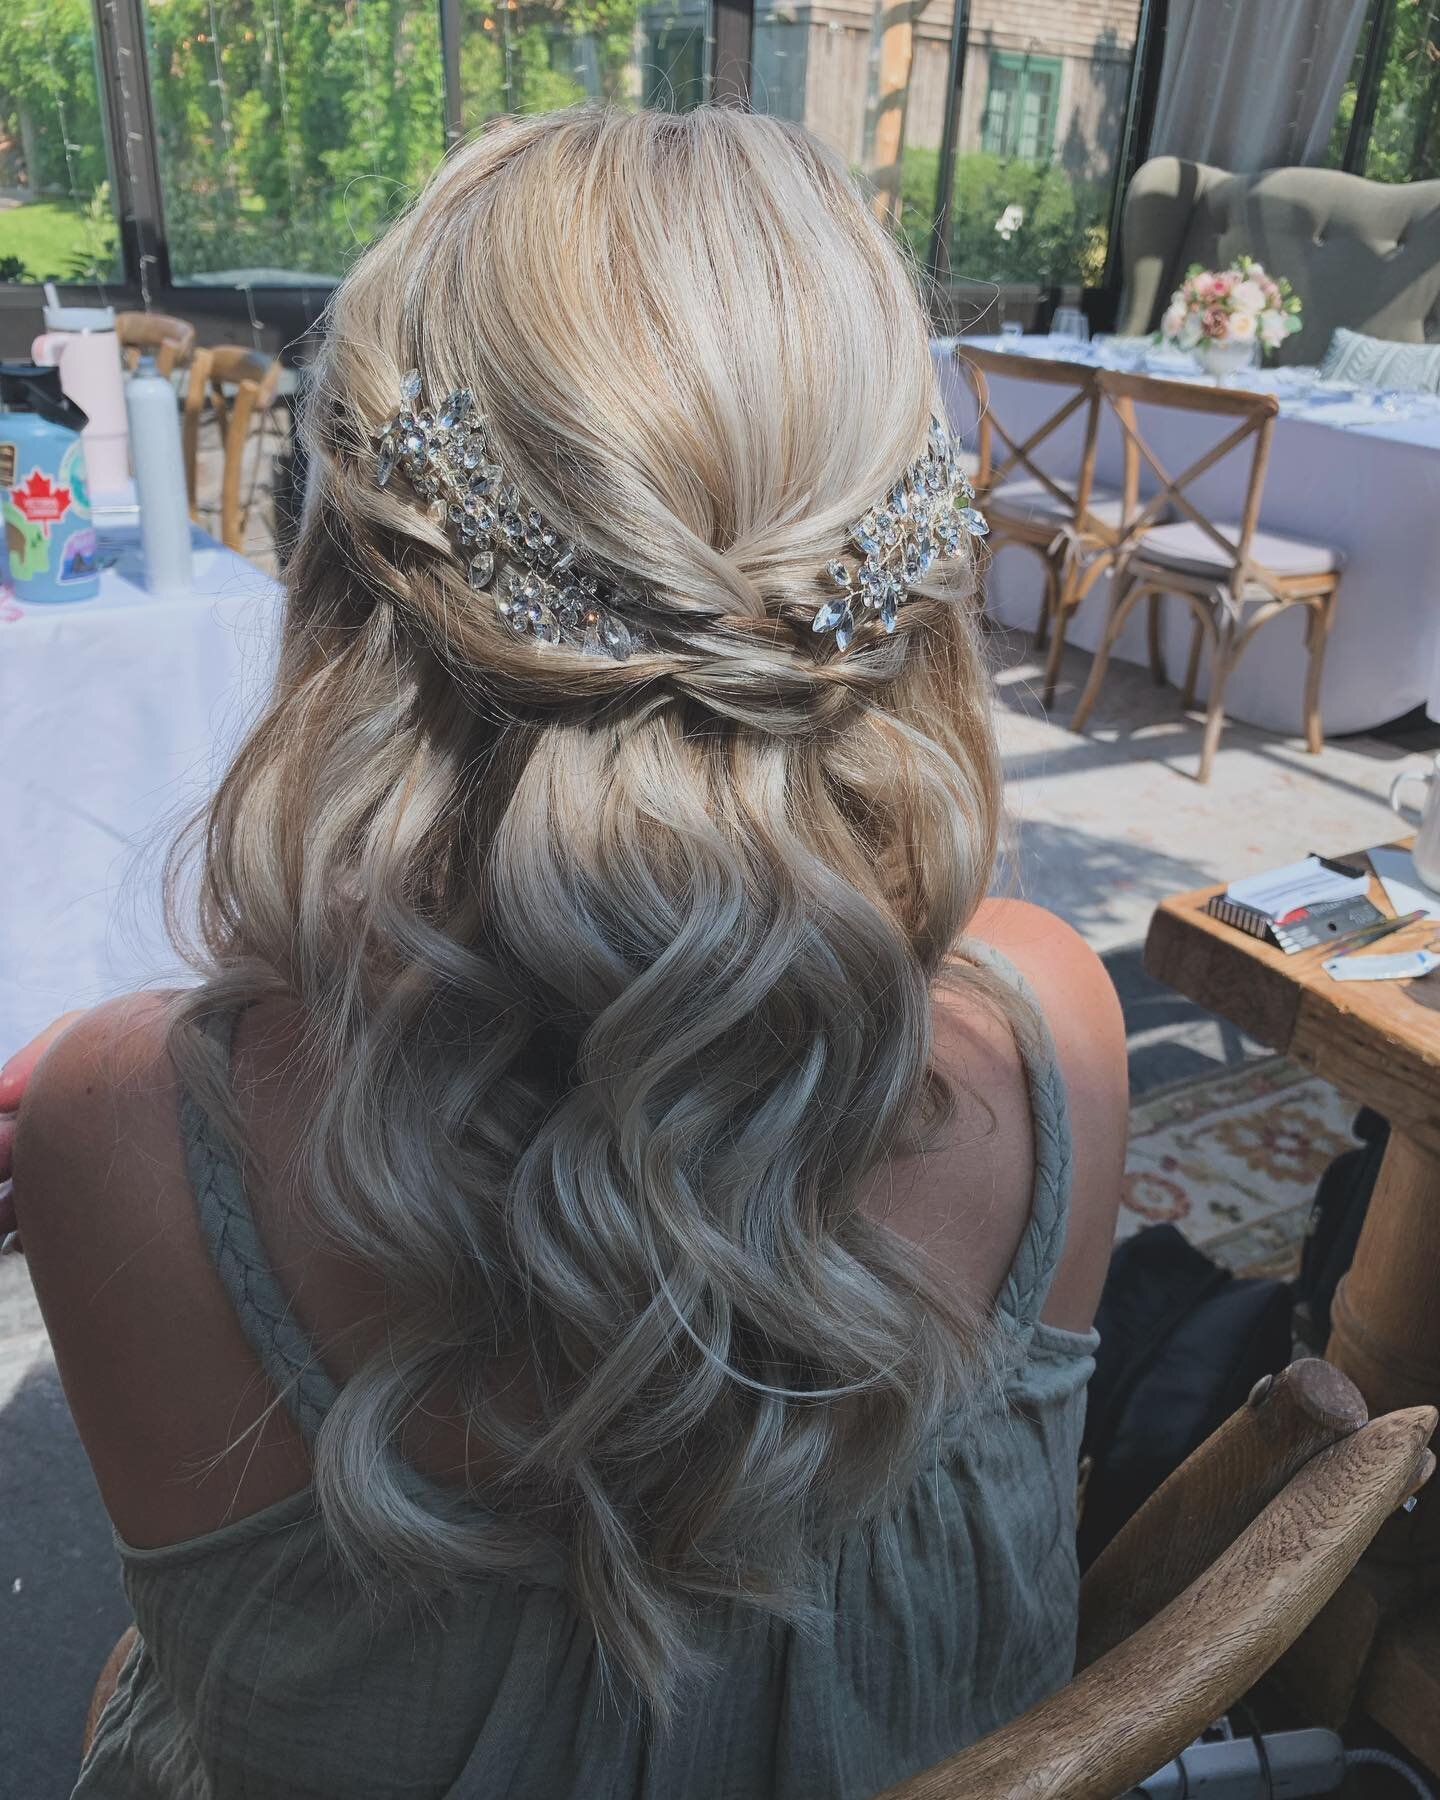 Holy Blonde ✨😍

Venue: @jedediahhawkinsinn 
Hair + Makeup: @sincerelysomethingborrowed

Everything about this style was perfect 🤩 

Hair color ✔️
Hair style ✔️
Hair piece ✔️

Our bride chose a beautiful natural makeup look as well 🤍

Sincerely Som